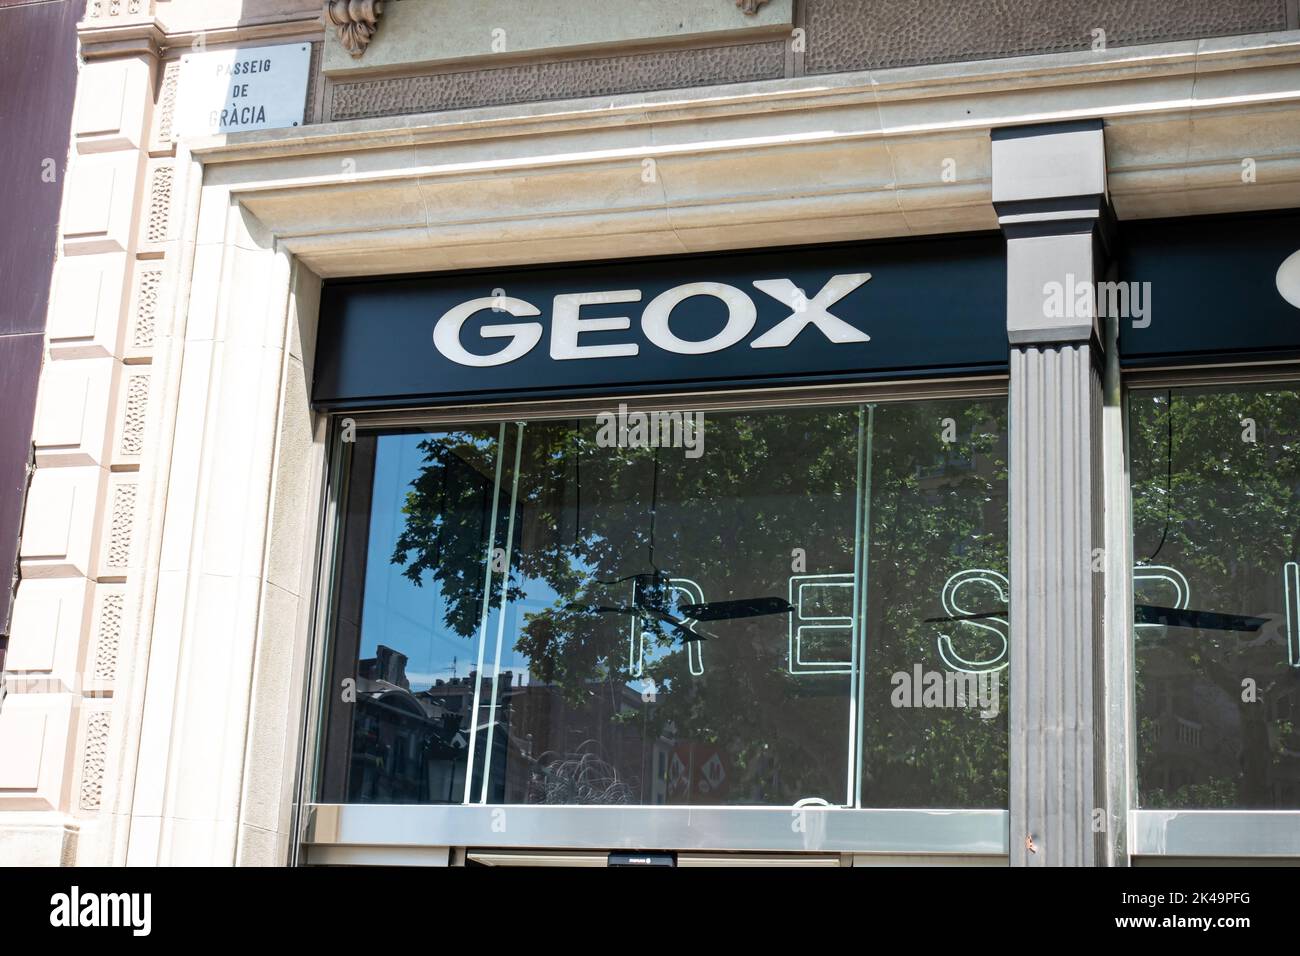 Barcelona, Spain - May 9, 2022: GEOX store. Geox is an Italian brand of shoe and clothing. Stock Photo